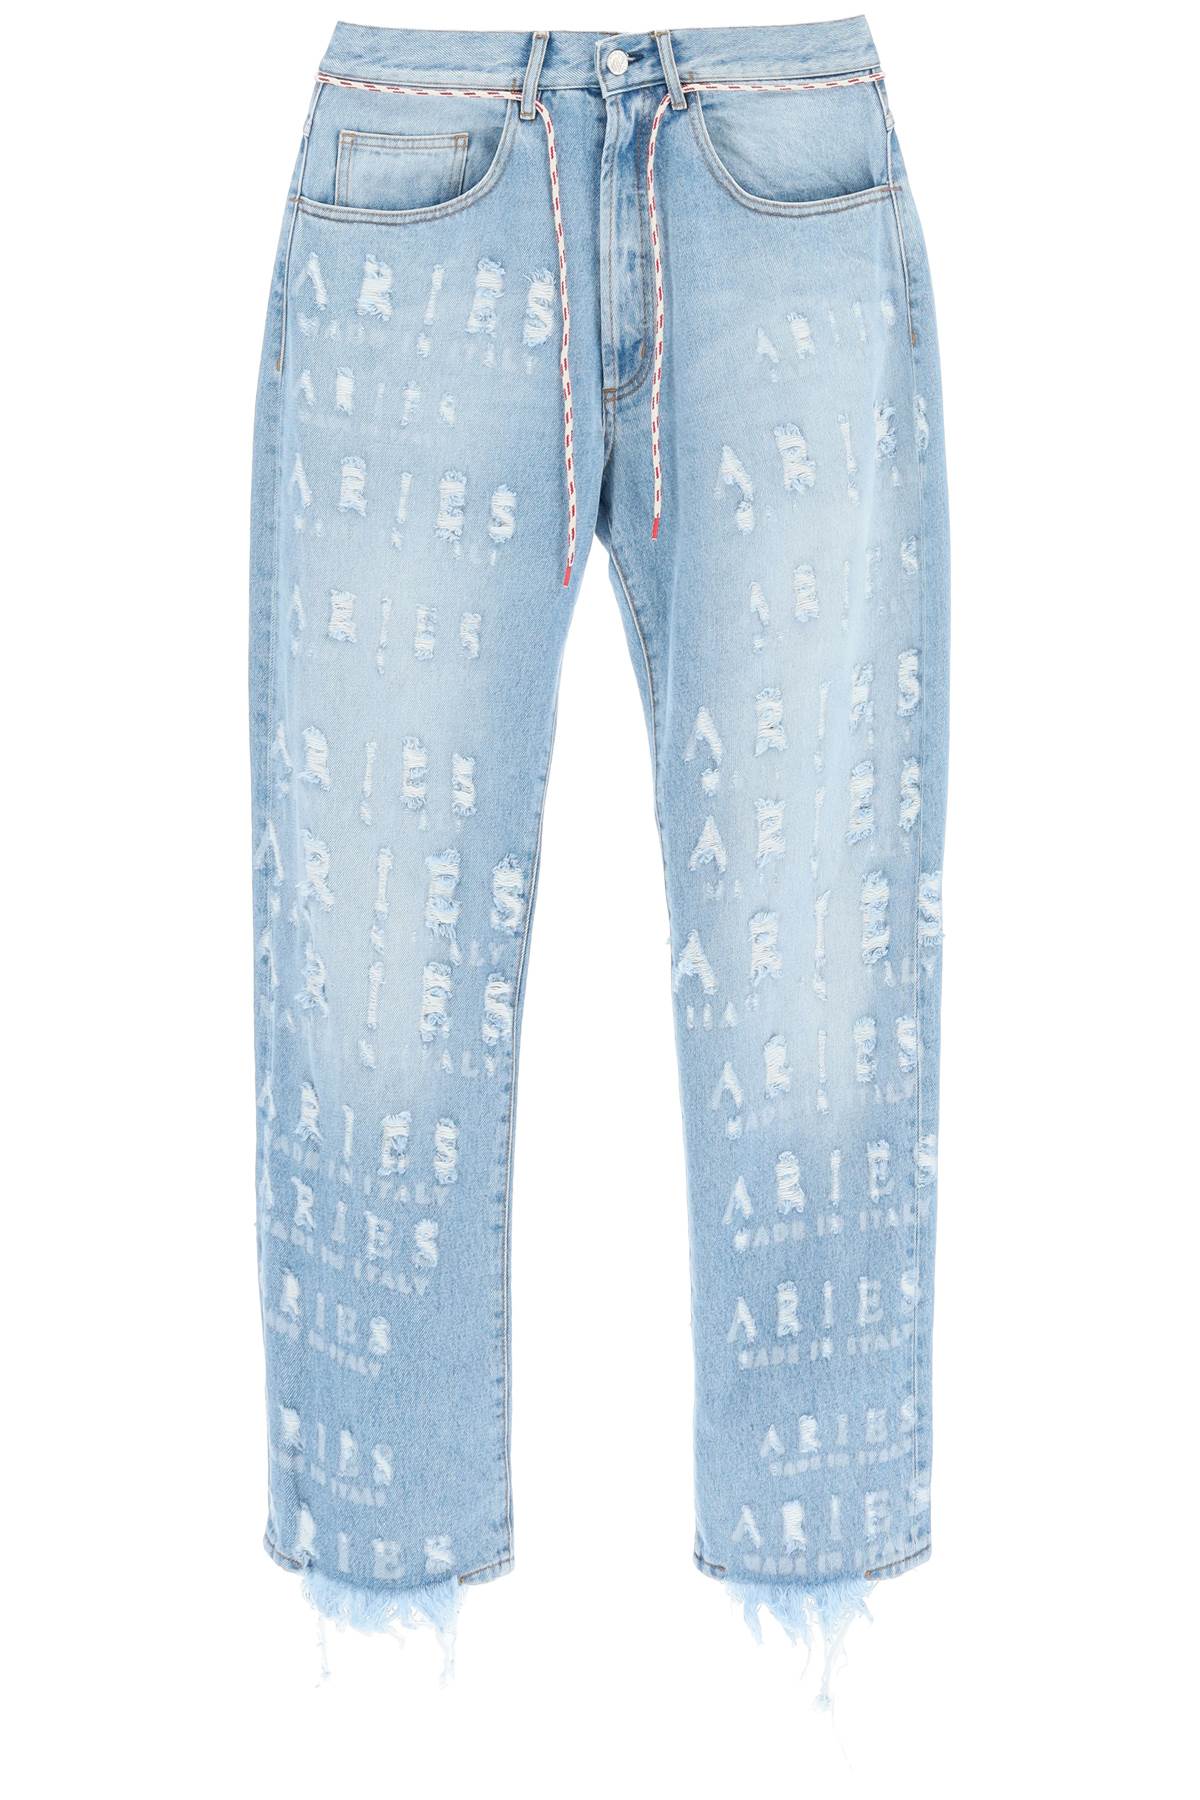 ARIES DISTRESSED LETTERING MOTIF JEANS